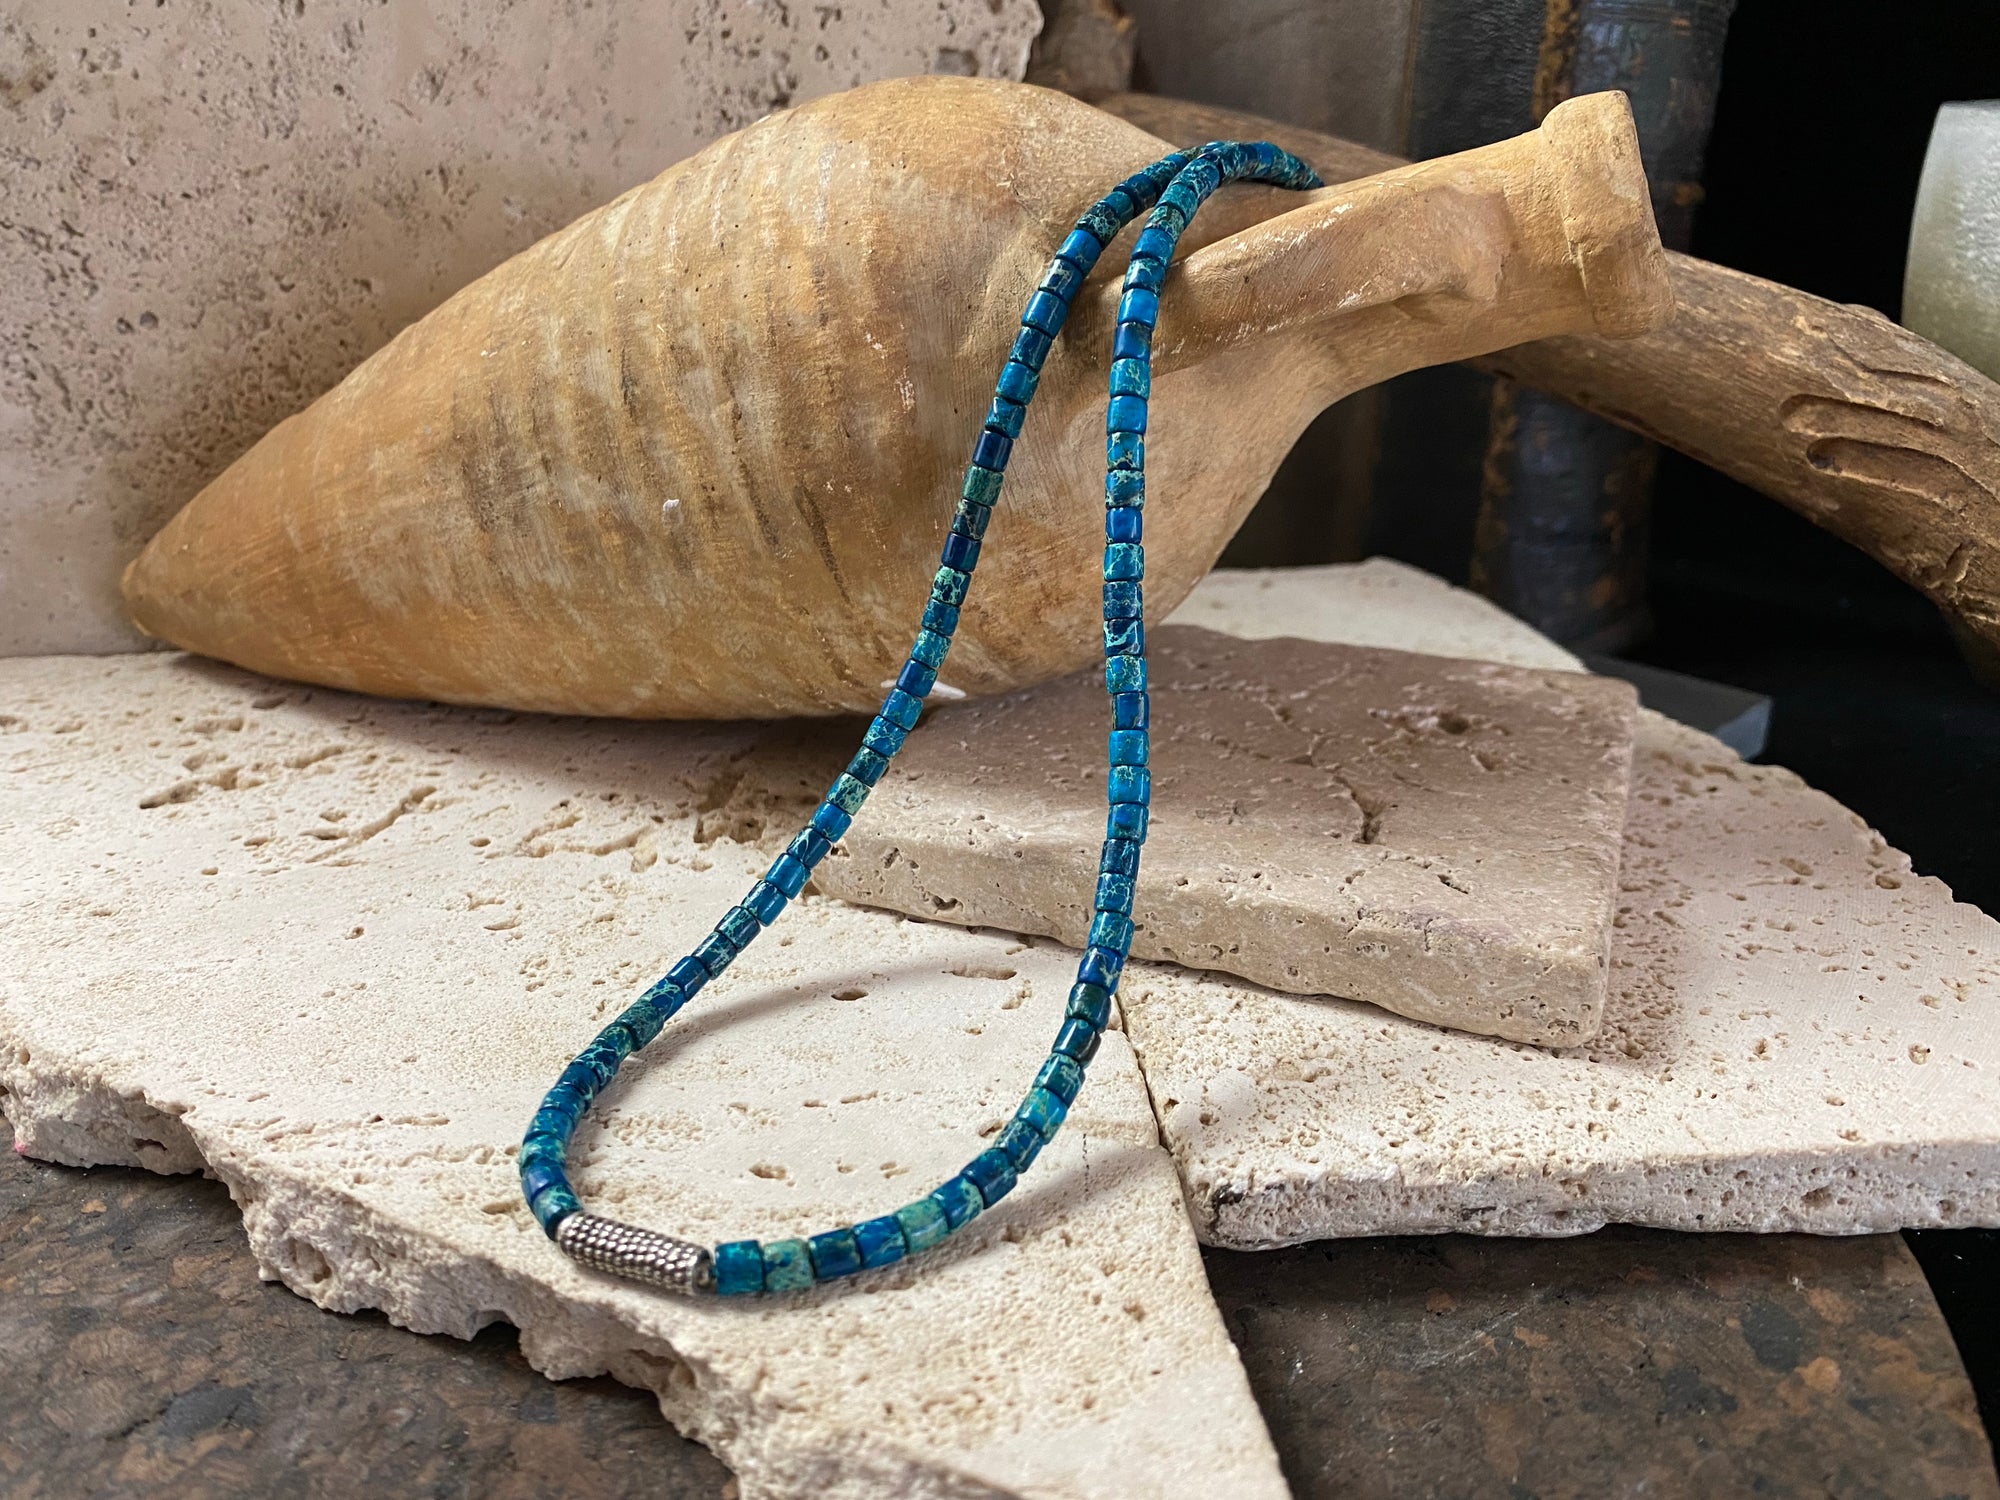 Strong blue green necklace crafted from natural blue jasper, with a heavy vintage silver bead as a centrepiece. Finished with sterling silver ends.  This is a unisex necklace that would look great on a guy or a woman. Length 46 cm (18")